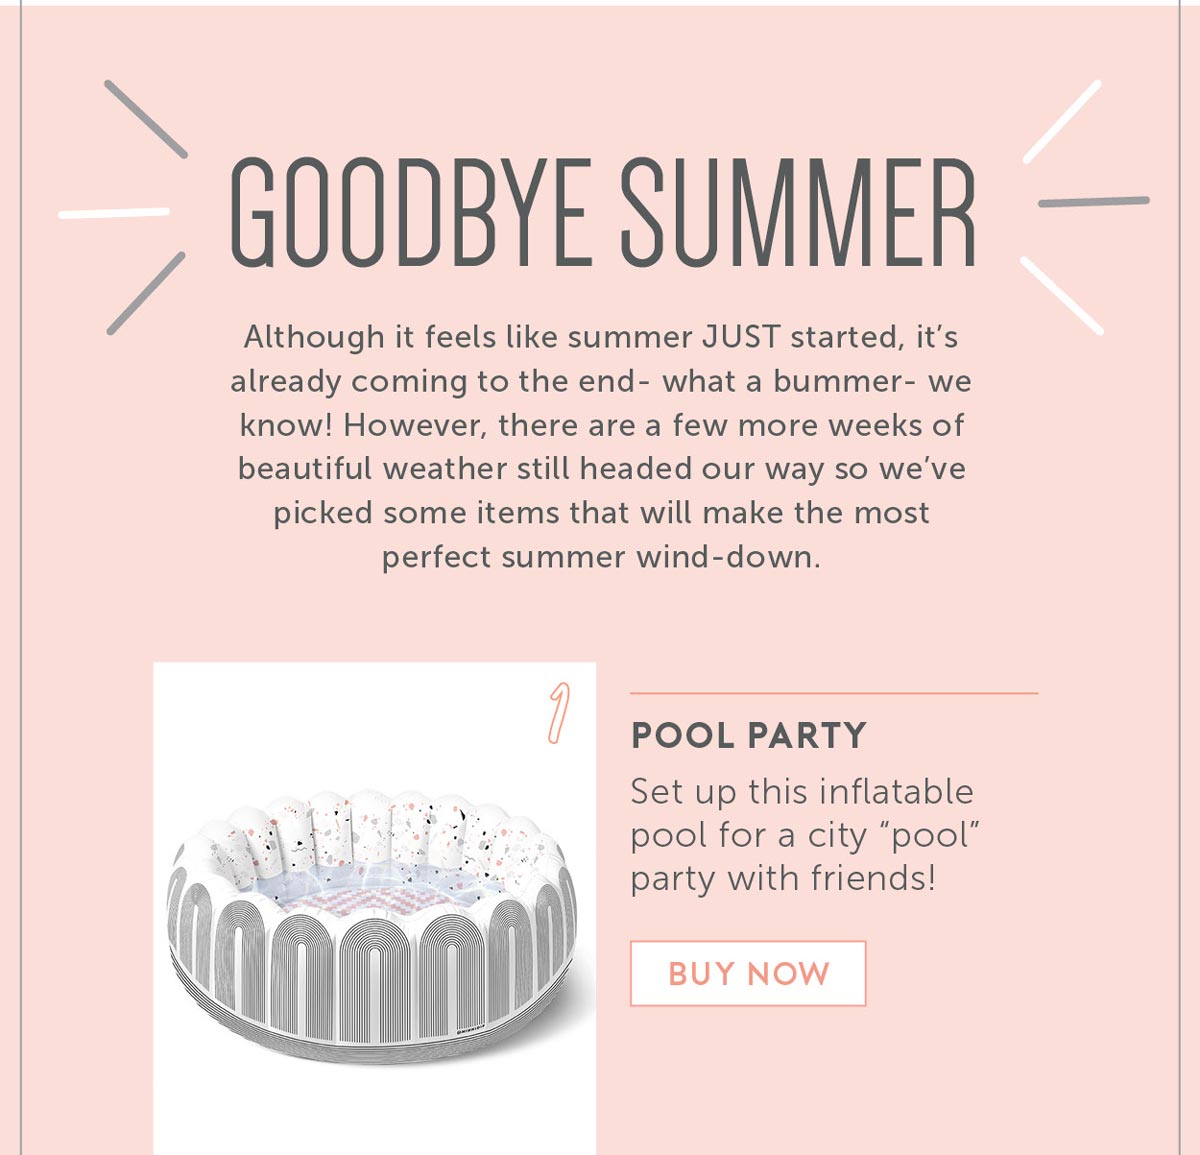 Goodbye Summer Although it feels like summer JUST started, it’s already coming to the end- what a bummer- we know! However, there are a few more weeks of beautiful weather still headed our way so we’ve picked some items that will make the most perfect summer wind-down. 1. Set up this inflatable pool for a city “pool” party with friends! 